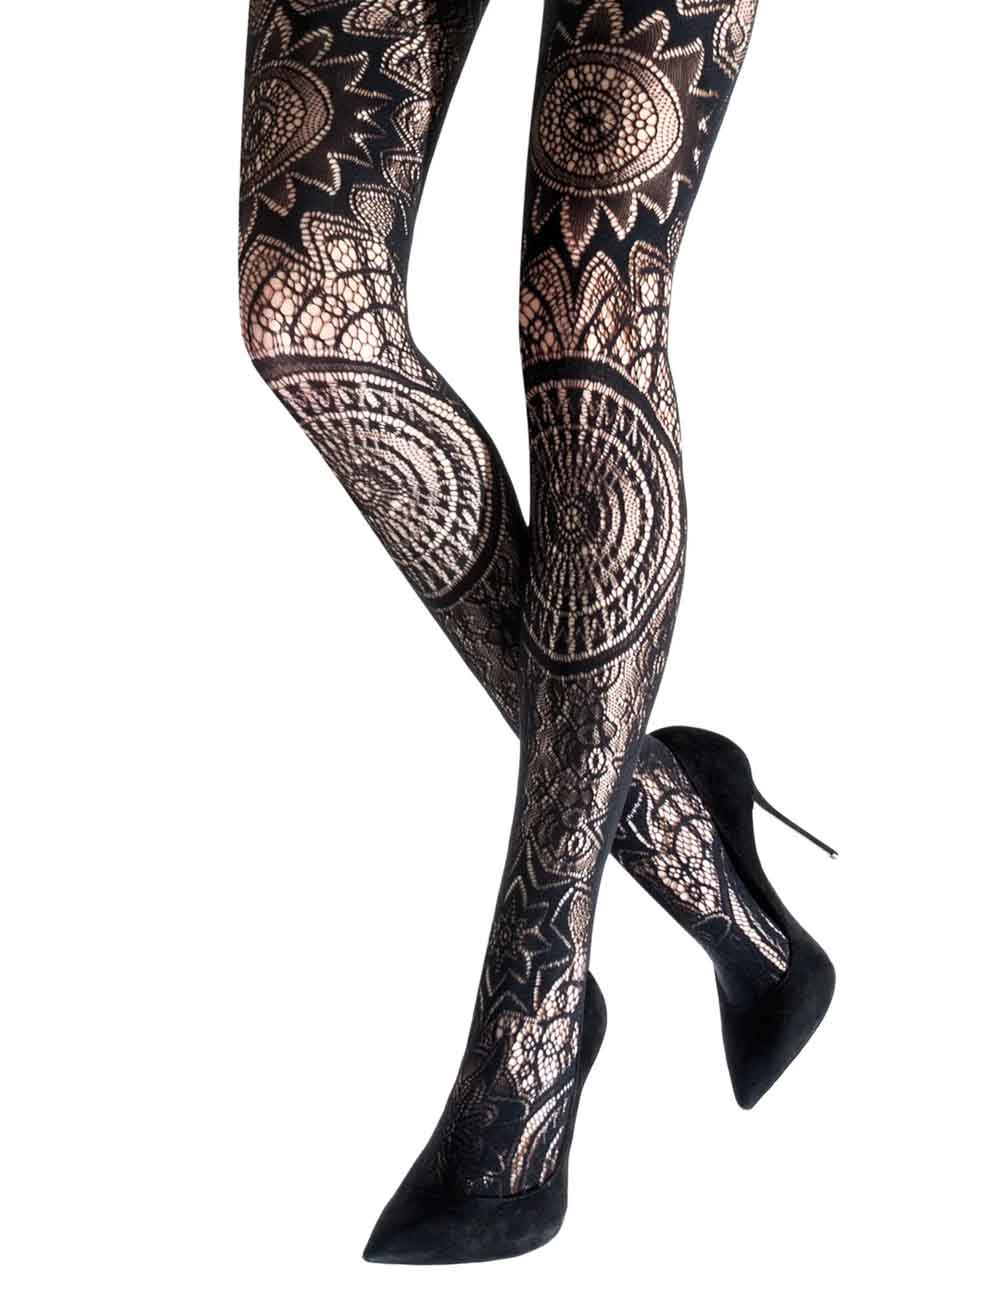 Emilio Cavallini Gothic Lace Tights - Black openwork lace tights in a gothic mandala style